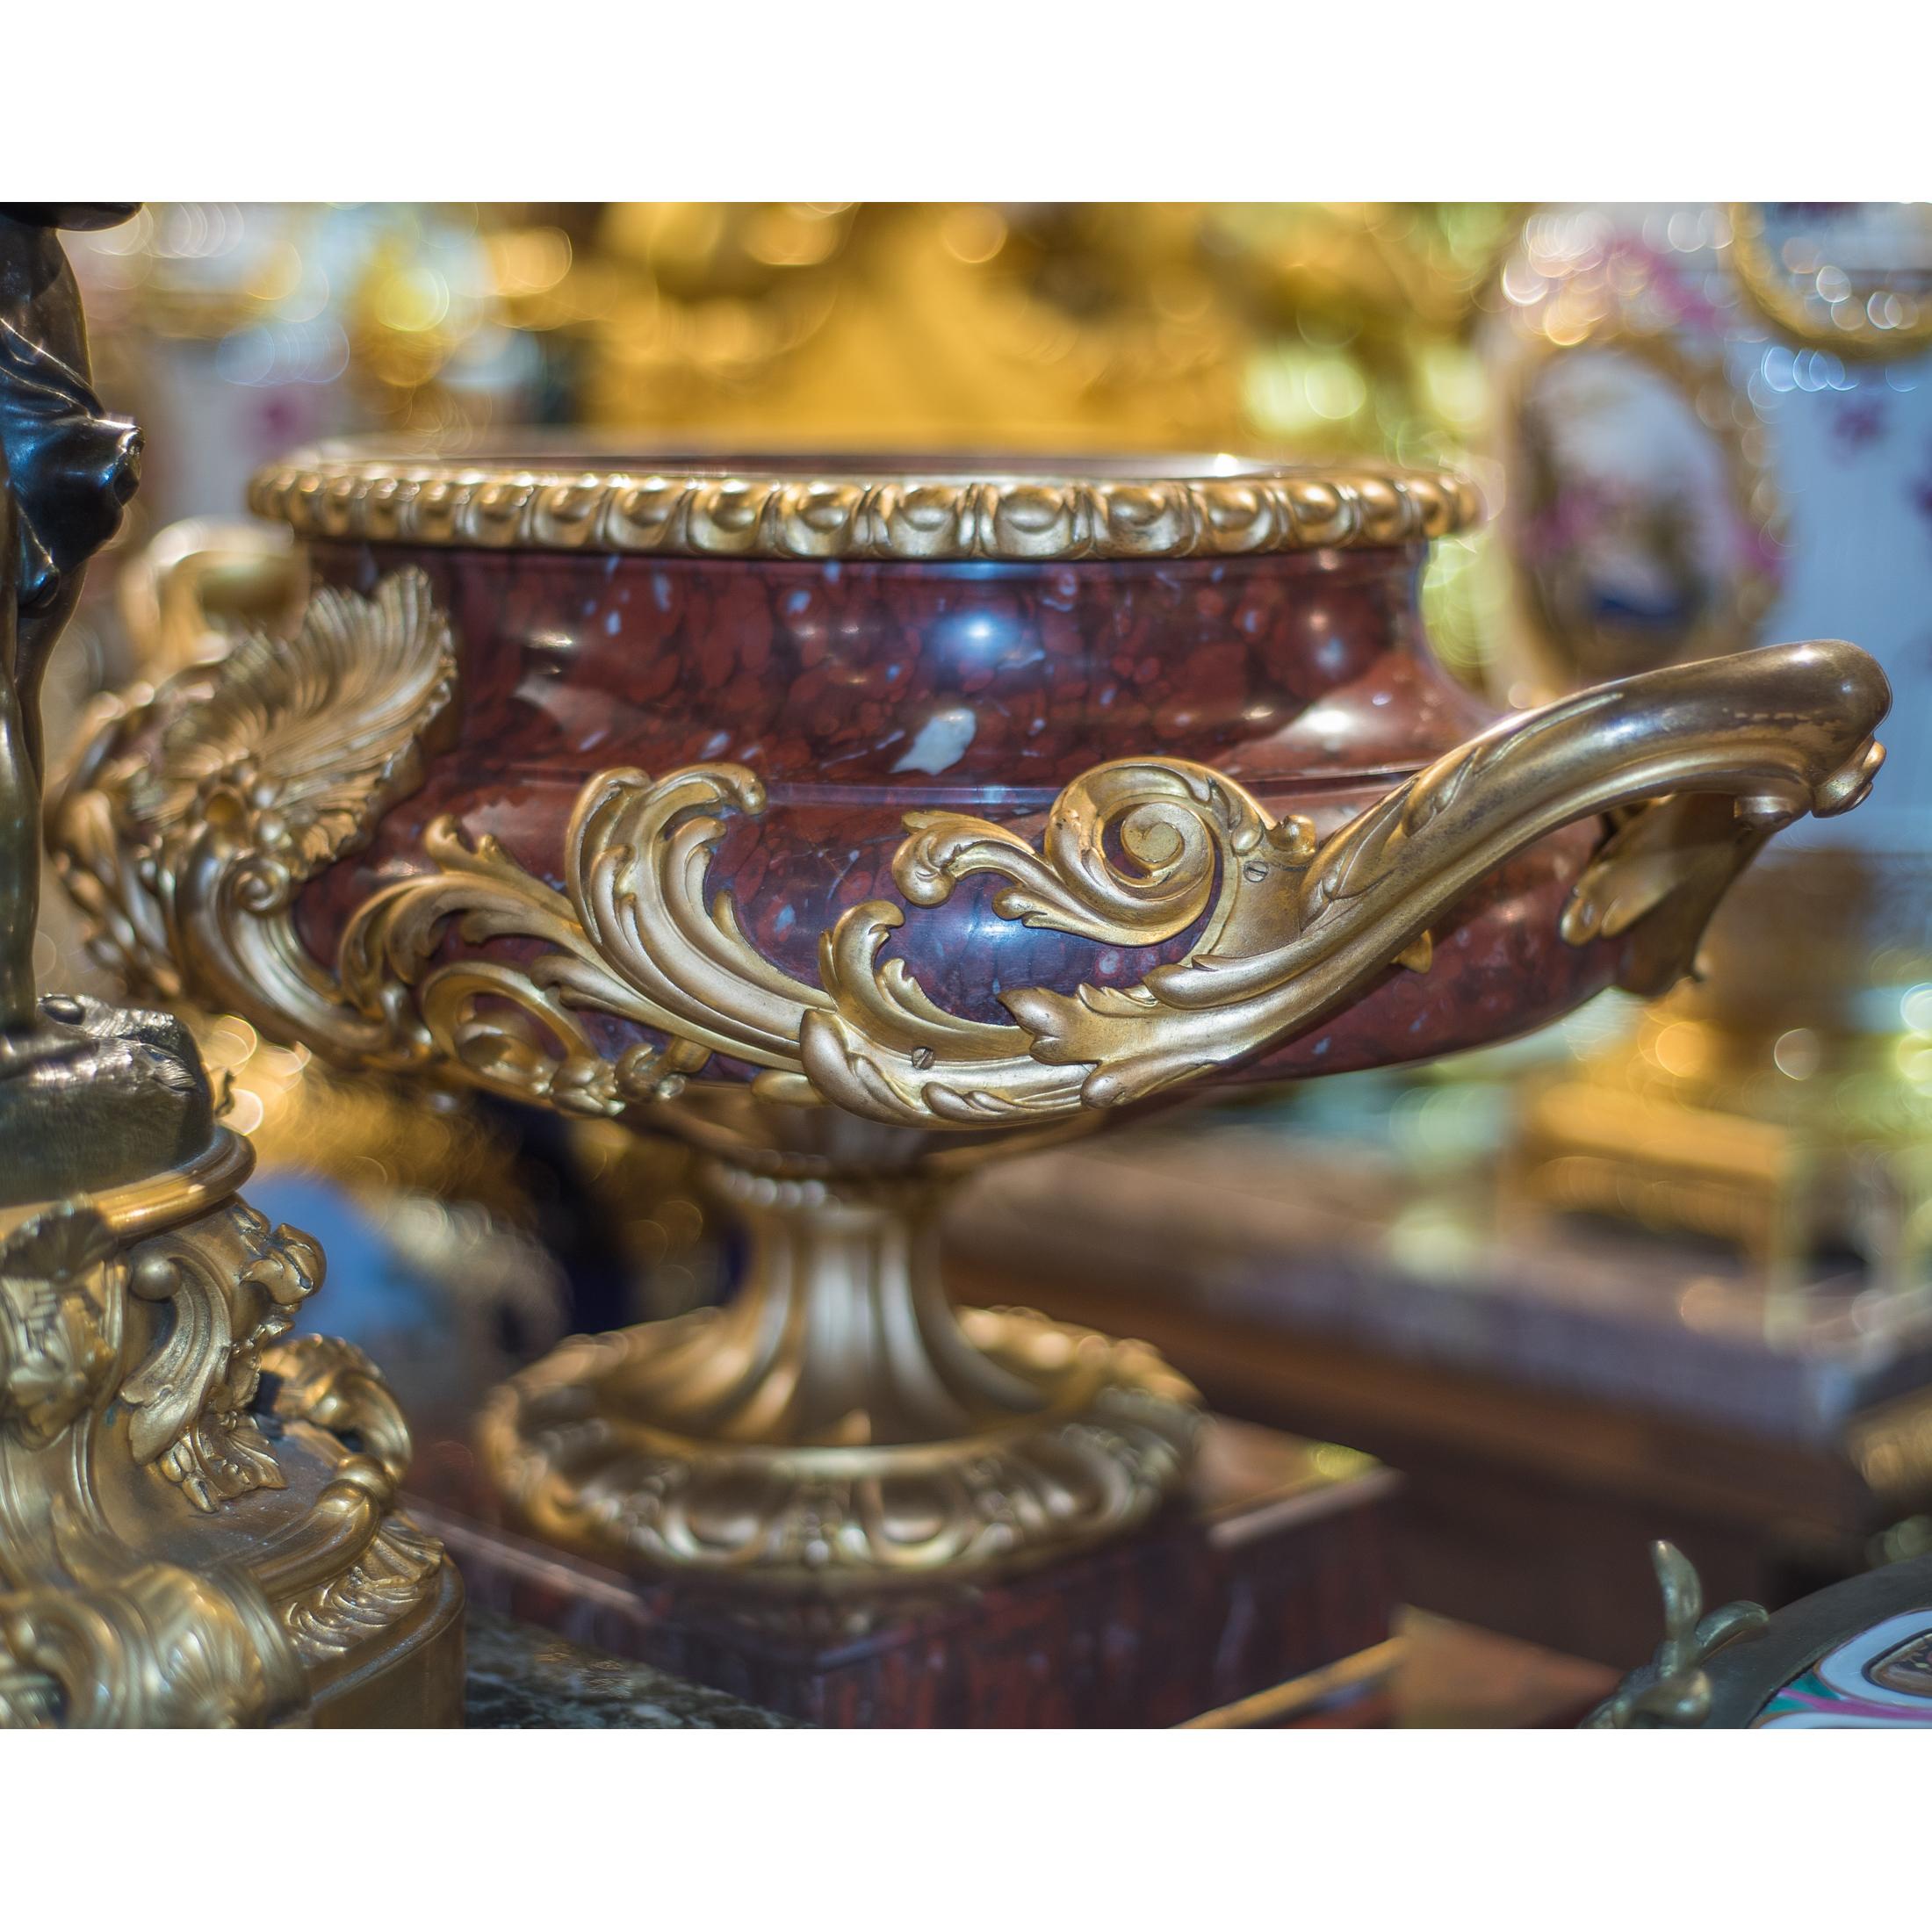 A fine quality Ormolu-mounted and gilt bronze rouge Griotte marble Jardinière centerpiece attributed to Ferdinand Barbedienne.
Gadrooned gilt bronze mounted with elaborate foliate scrolls extending from the handles to the large scallop shell at the